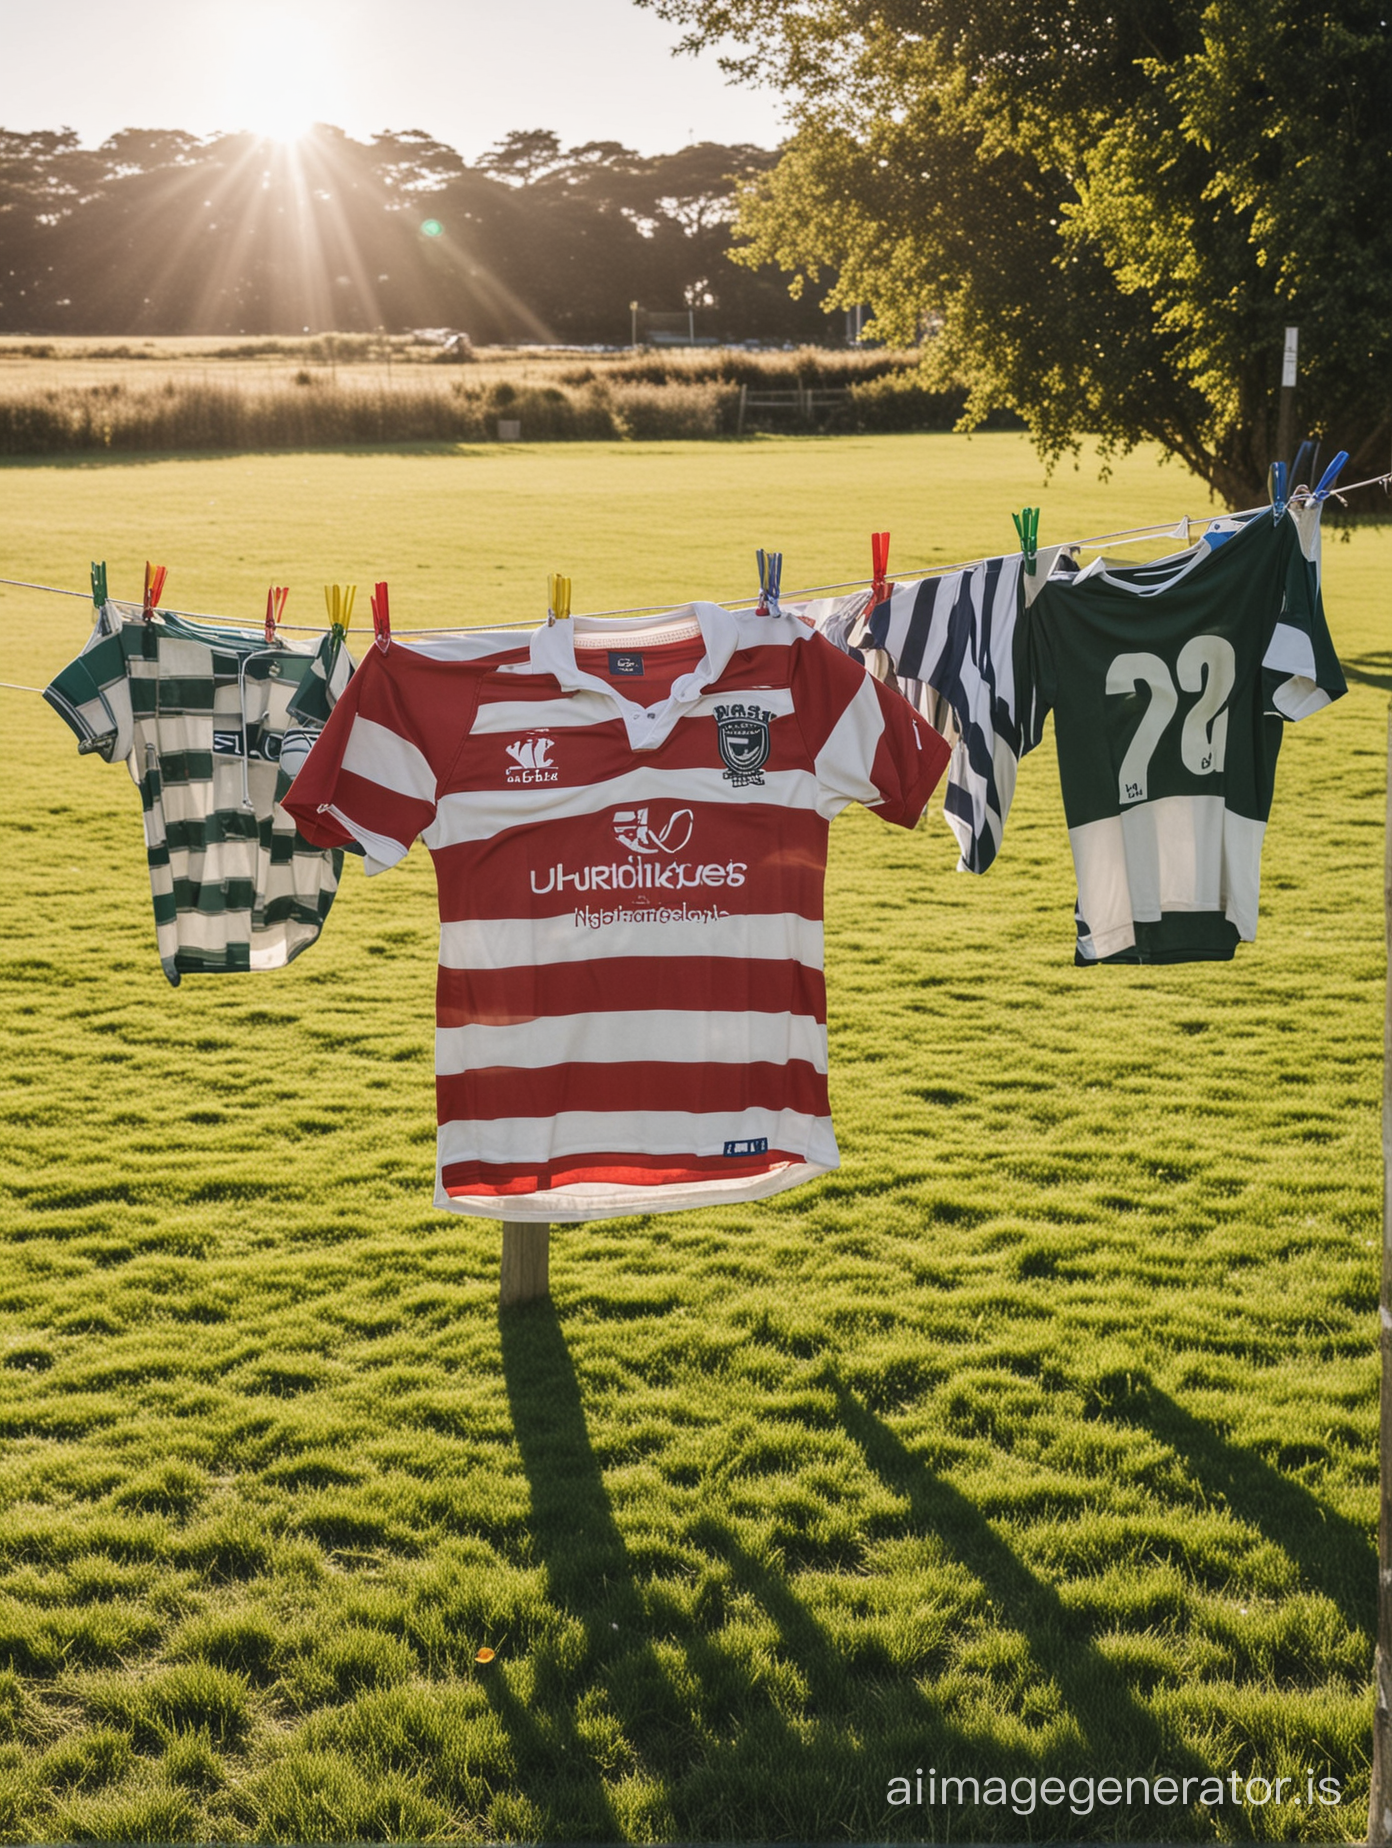 some rugby jersey hanging on a washing line behind the washing line is a shining sun the clothes are coloured, some with stripes, there are so many rugby jersey
the wasing line hangs in a big grassfield, back of jersey with numbers